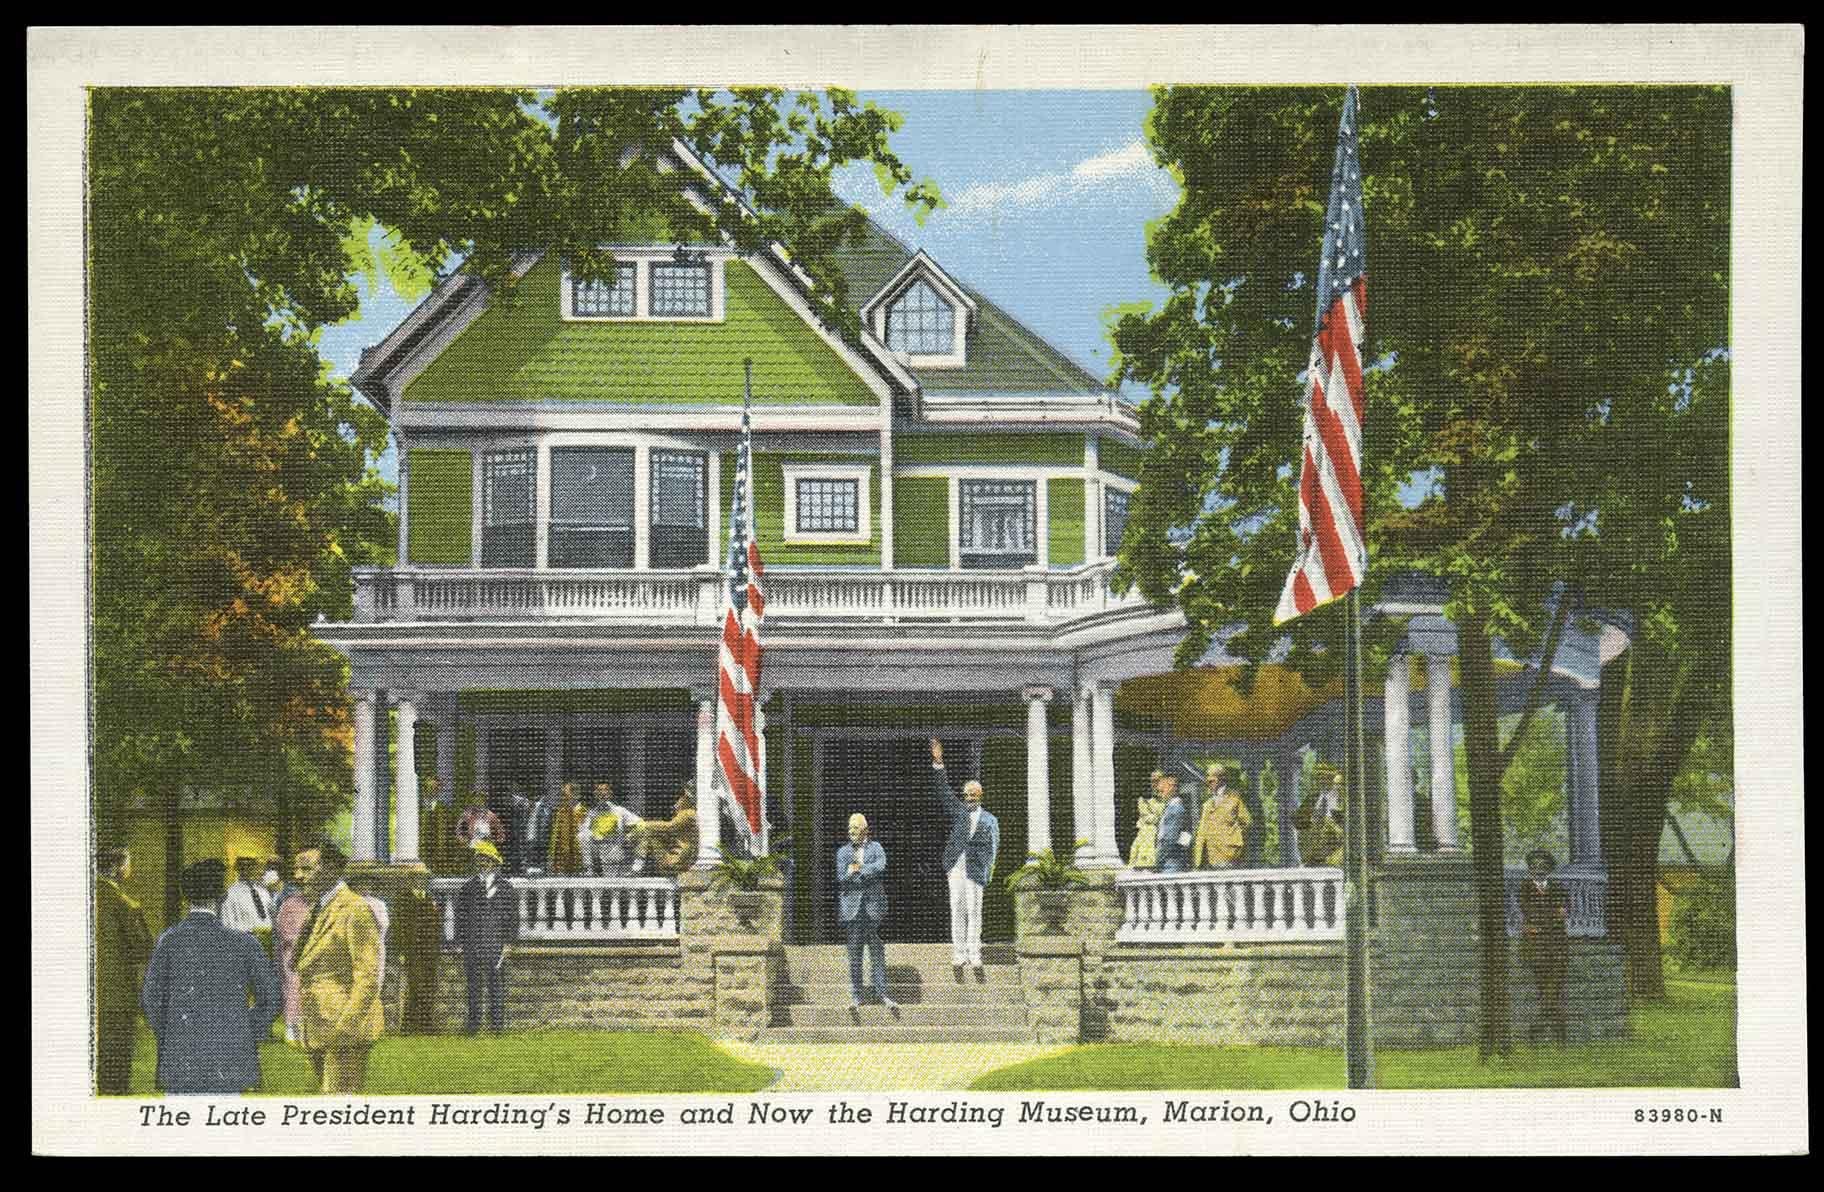 The Late President Harding’s Home and Now the Harding Museum. Chicago: Curt Teich Postcard Company, ca. 1923. 